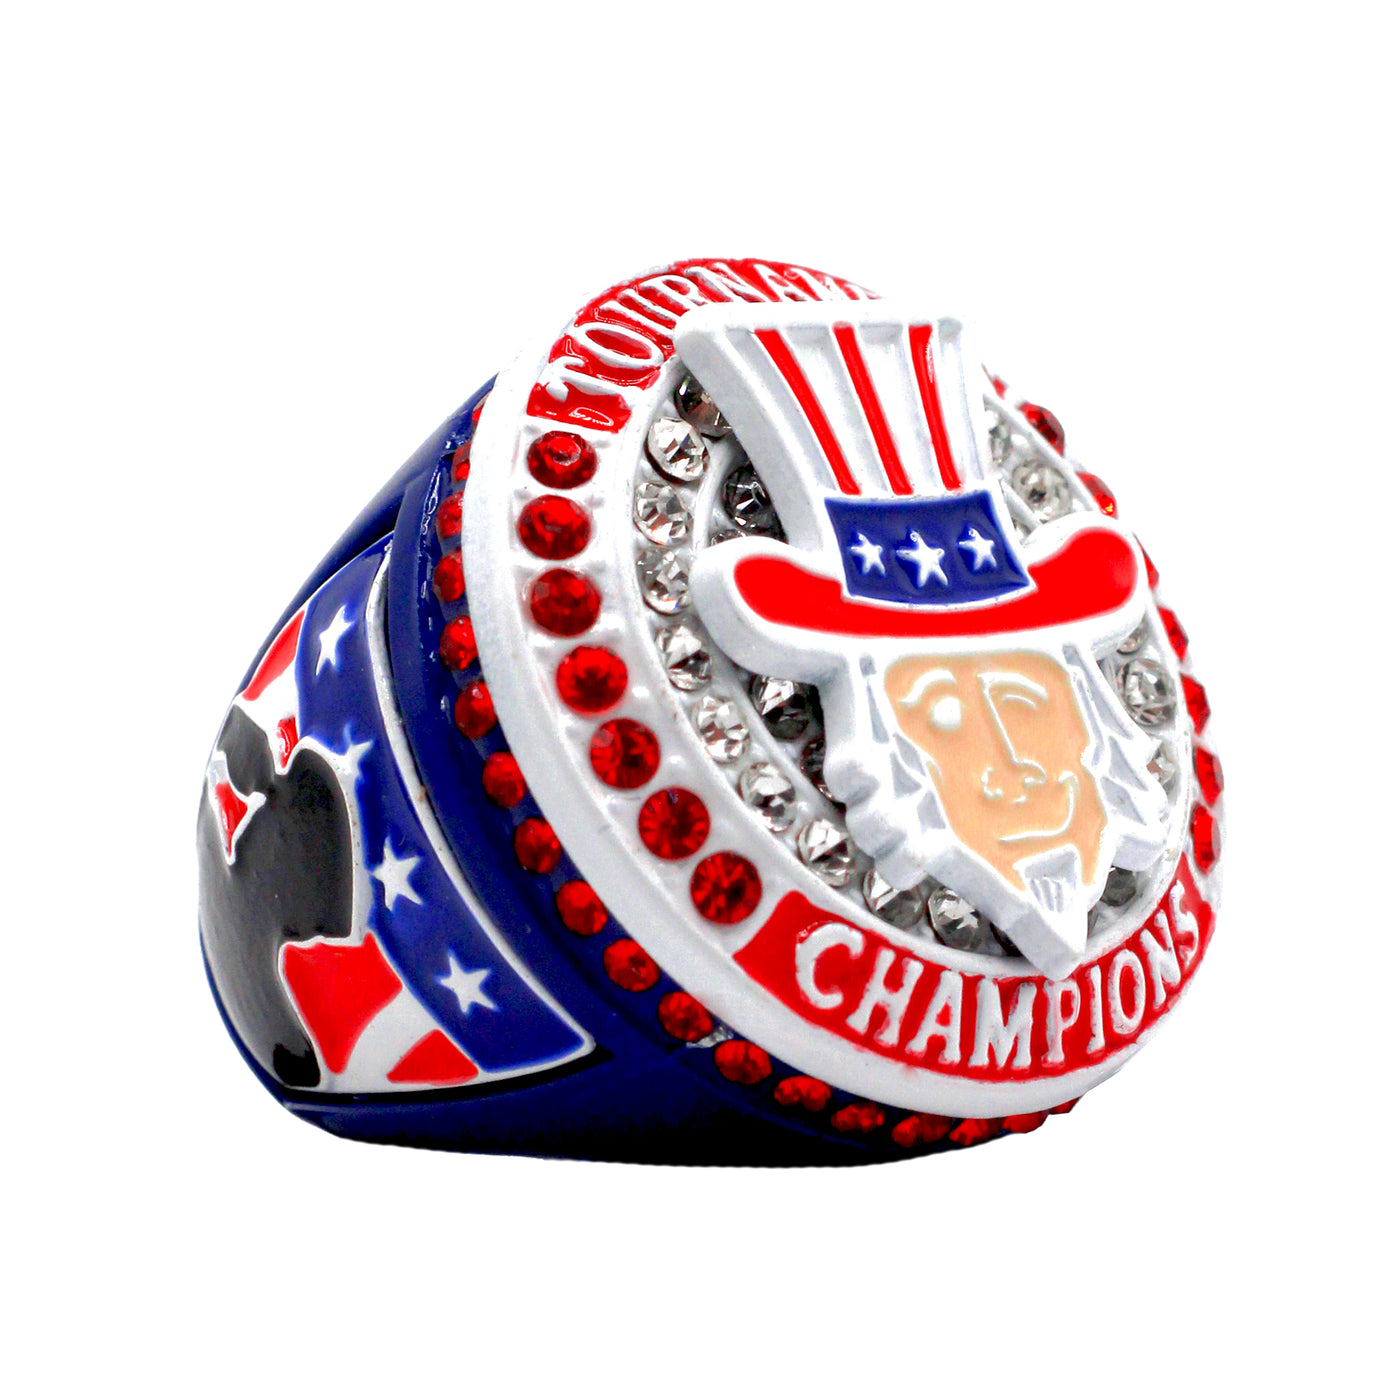 MEMORIAL DAY UNCLE SAM TOURNAMENT CHAMPIONS RING